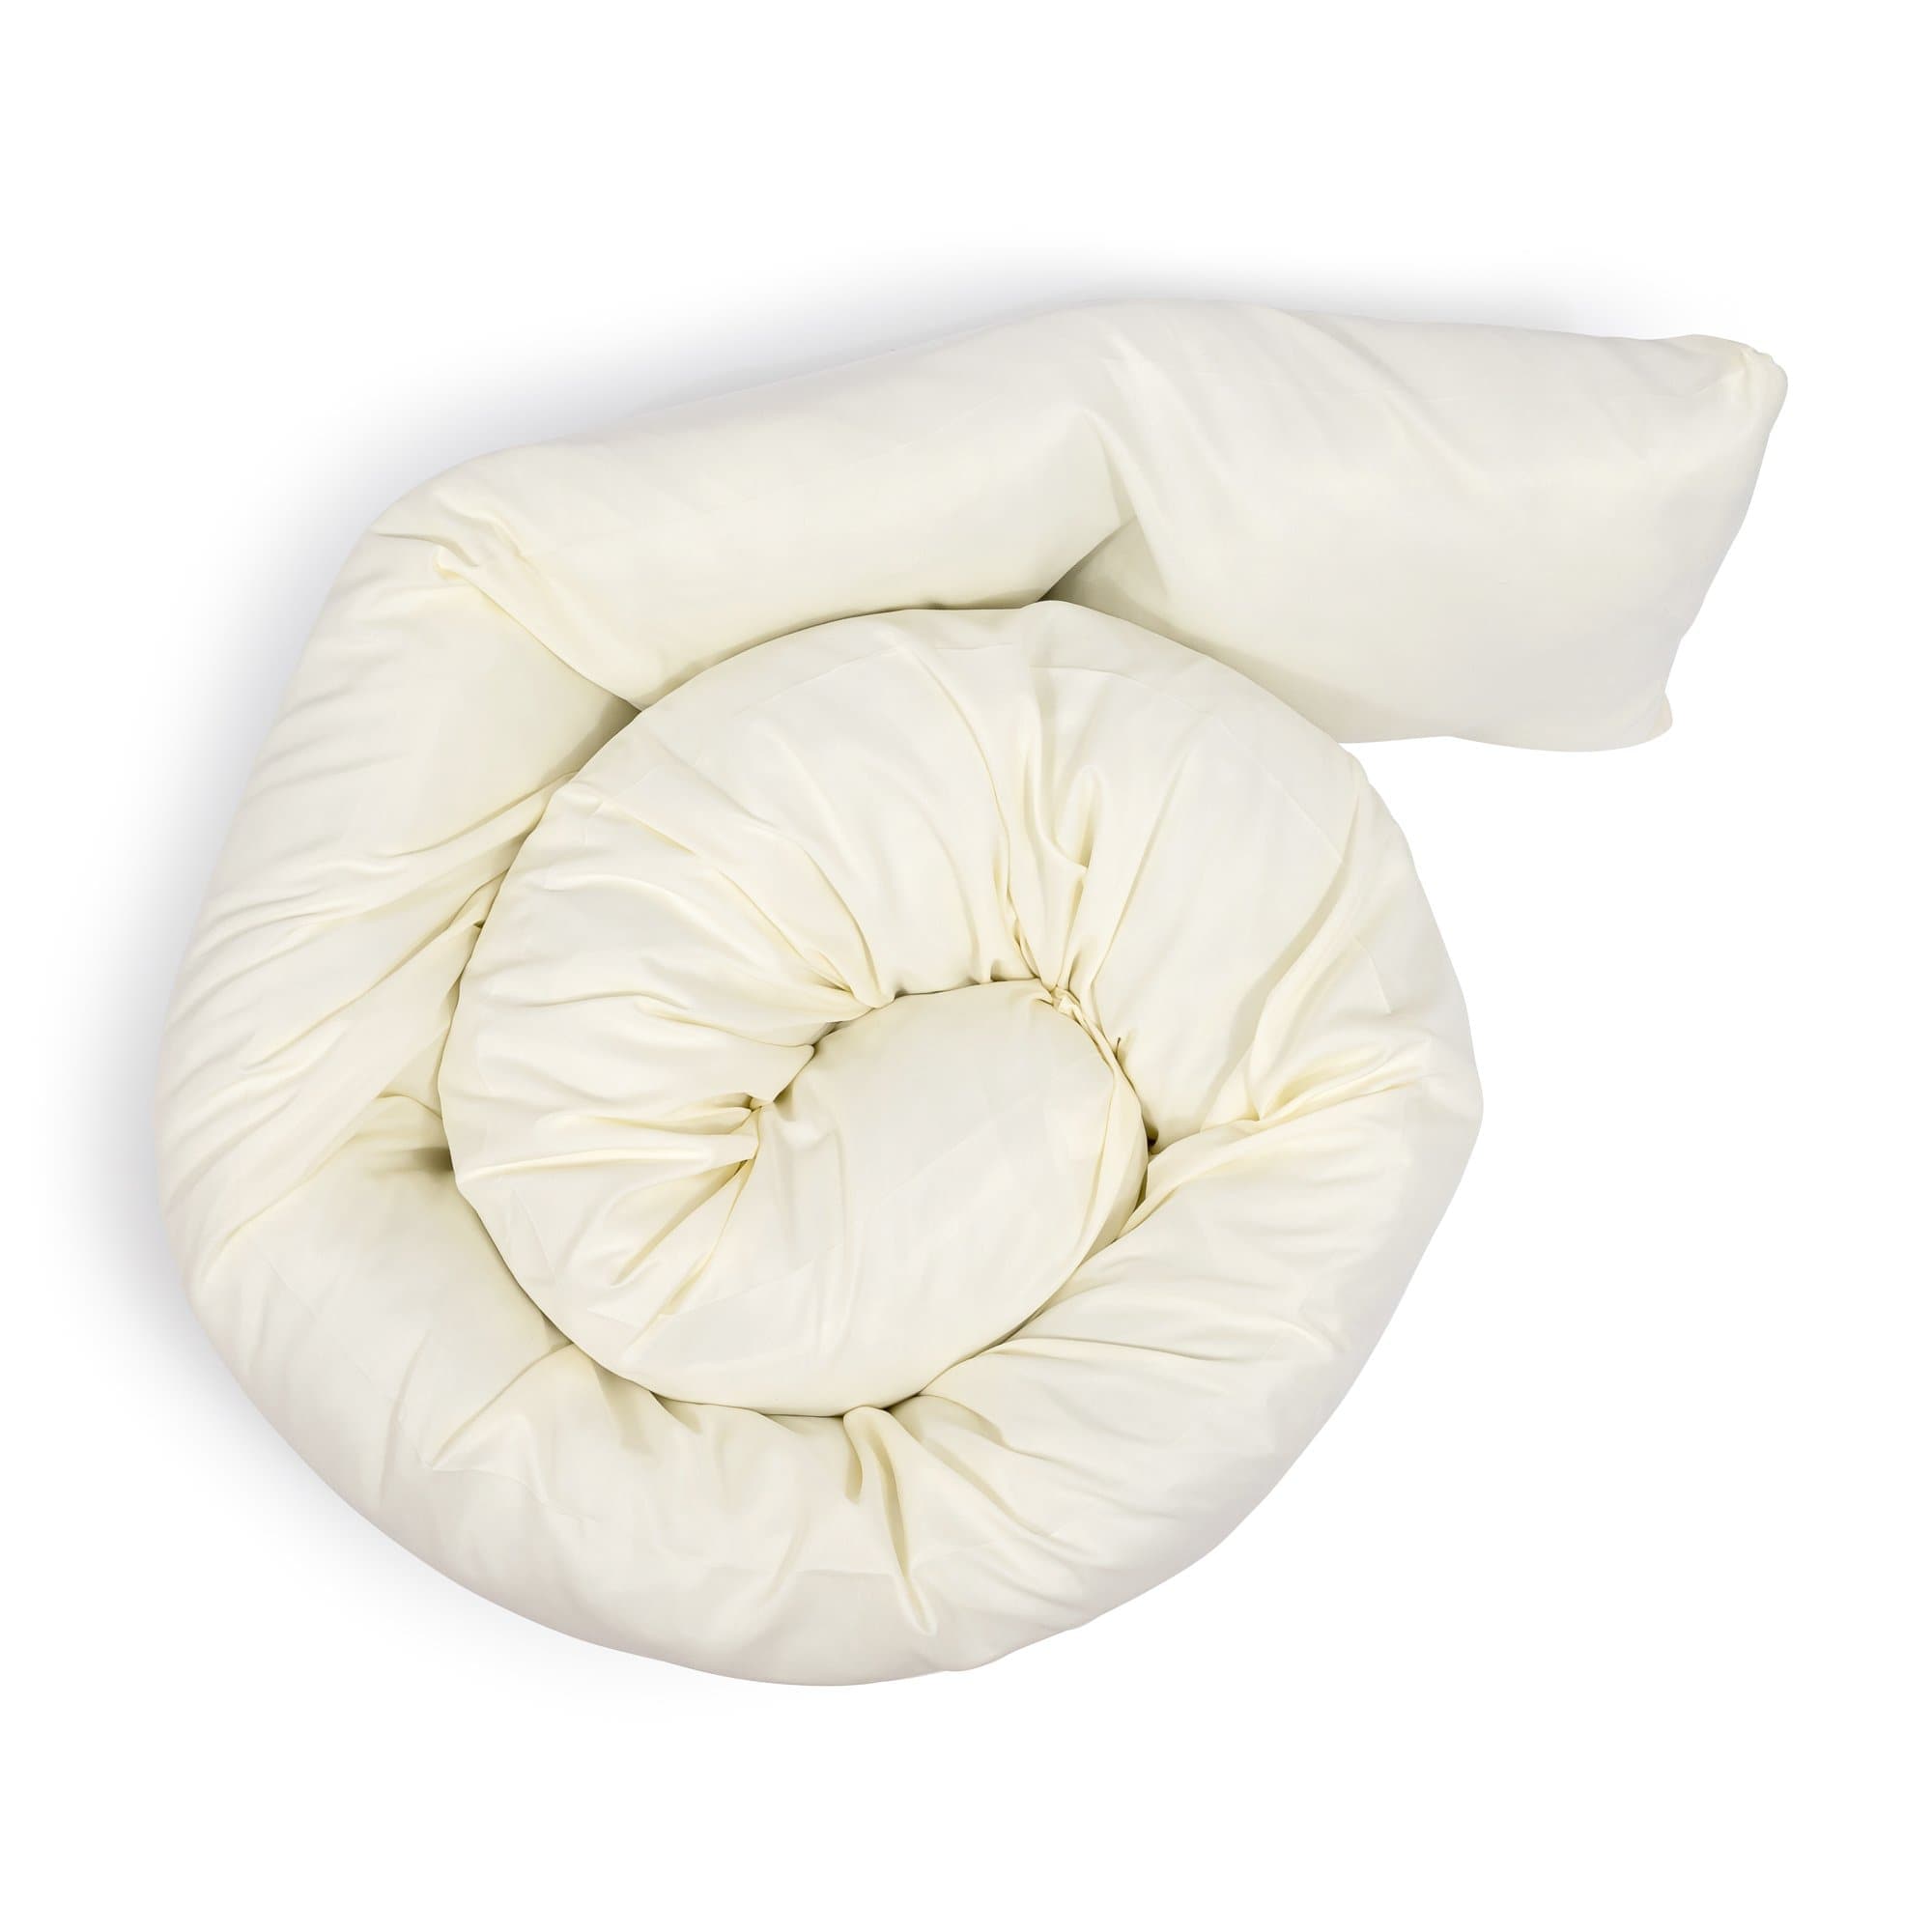 6 Ft Maternity Pillow And Case - Cream -  | For Your Little One